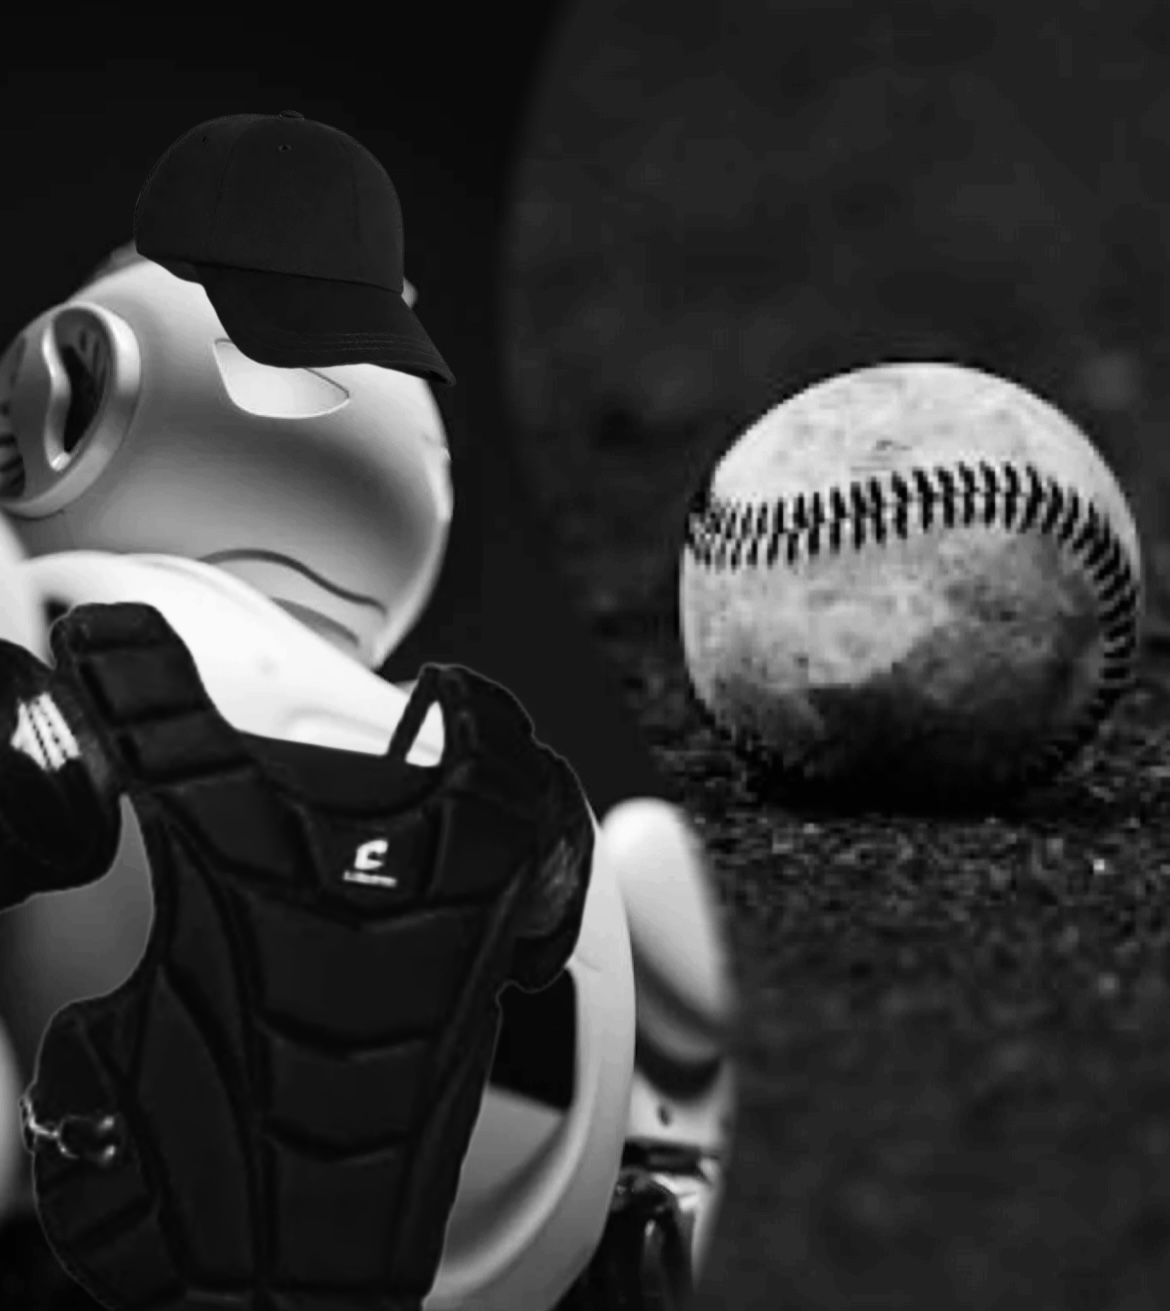 MLB Announces Partner Pioneer League Will Use Robo-Umps an Automated Ball-Strike System